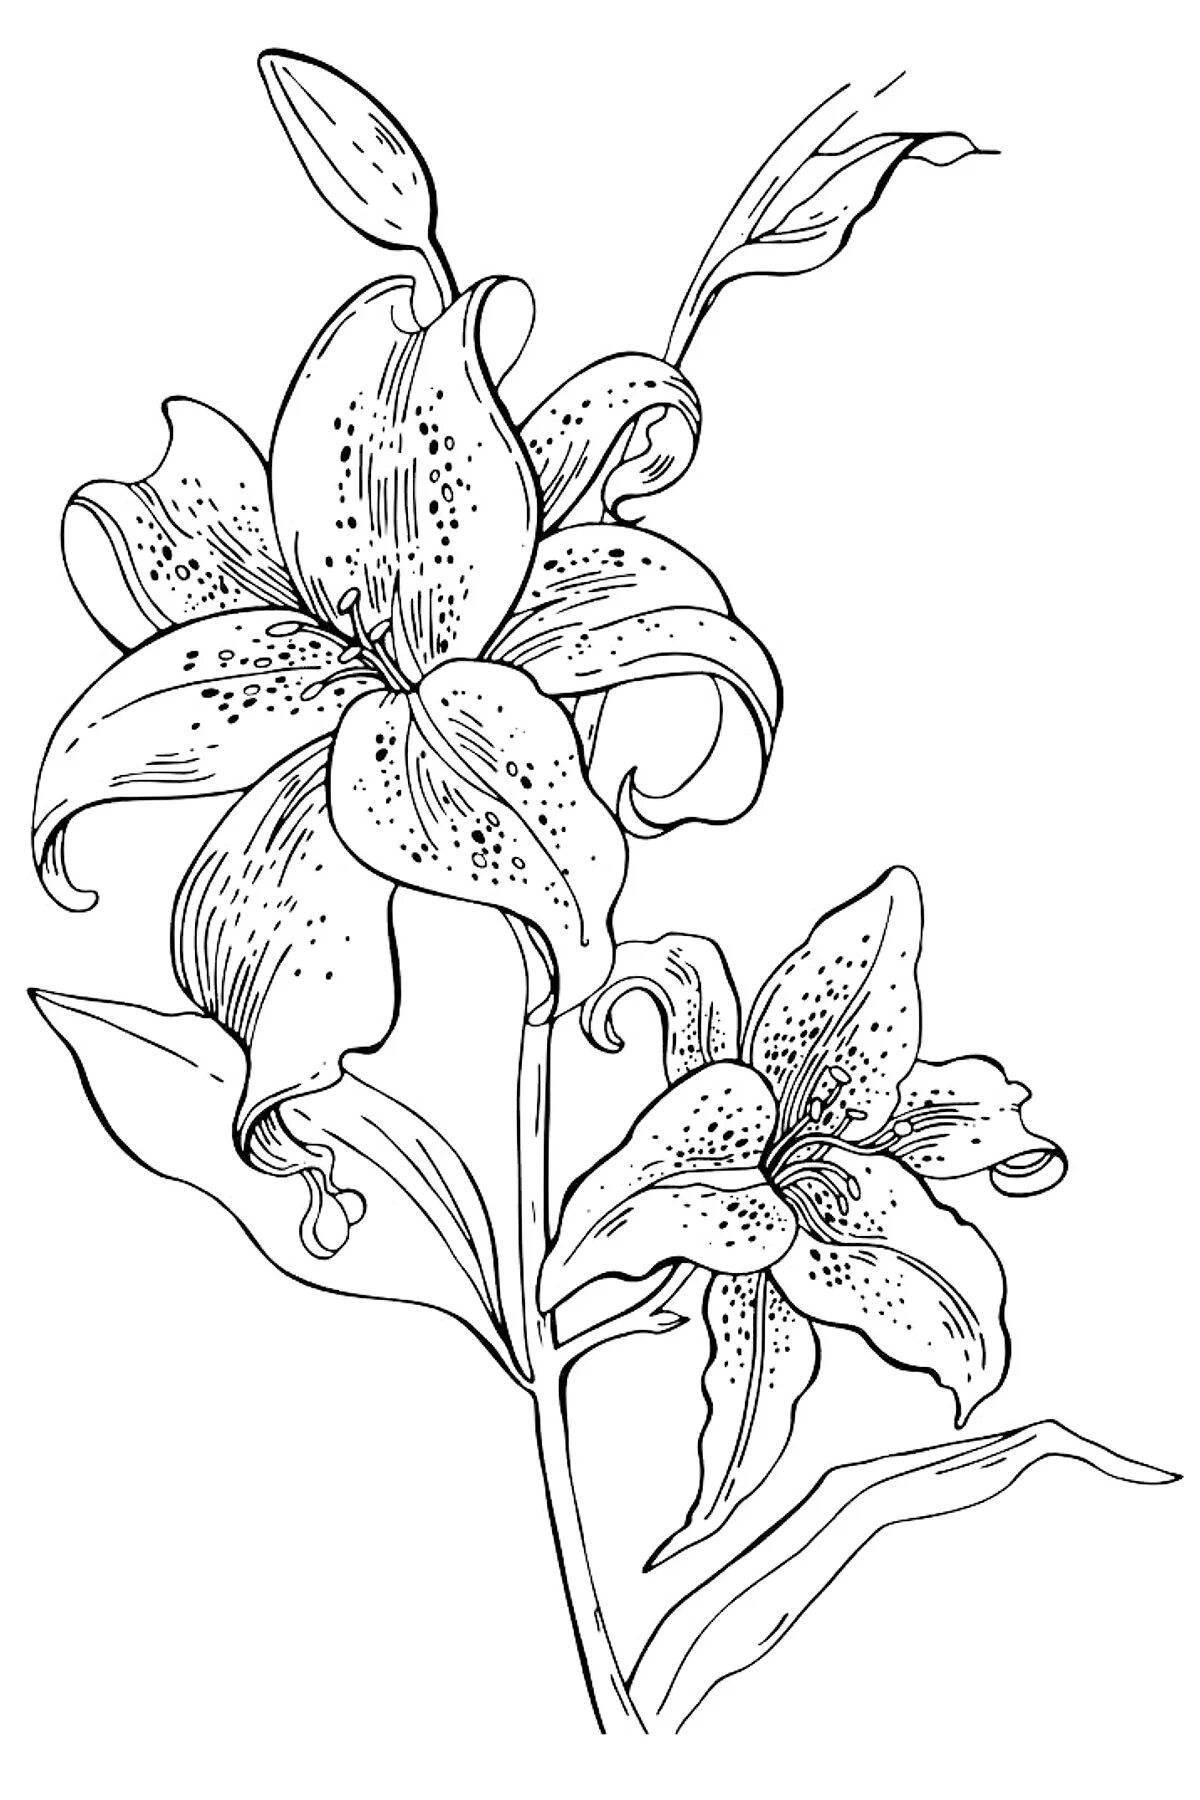 Joyful lily coloring pages for kids